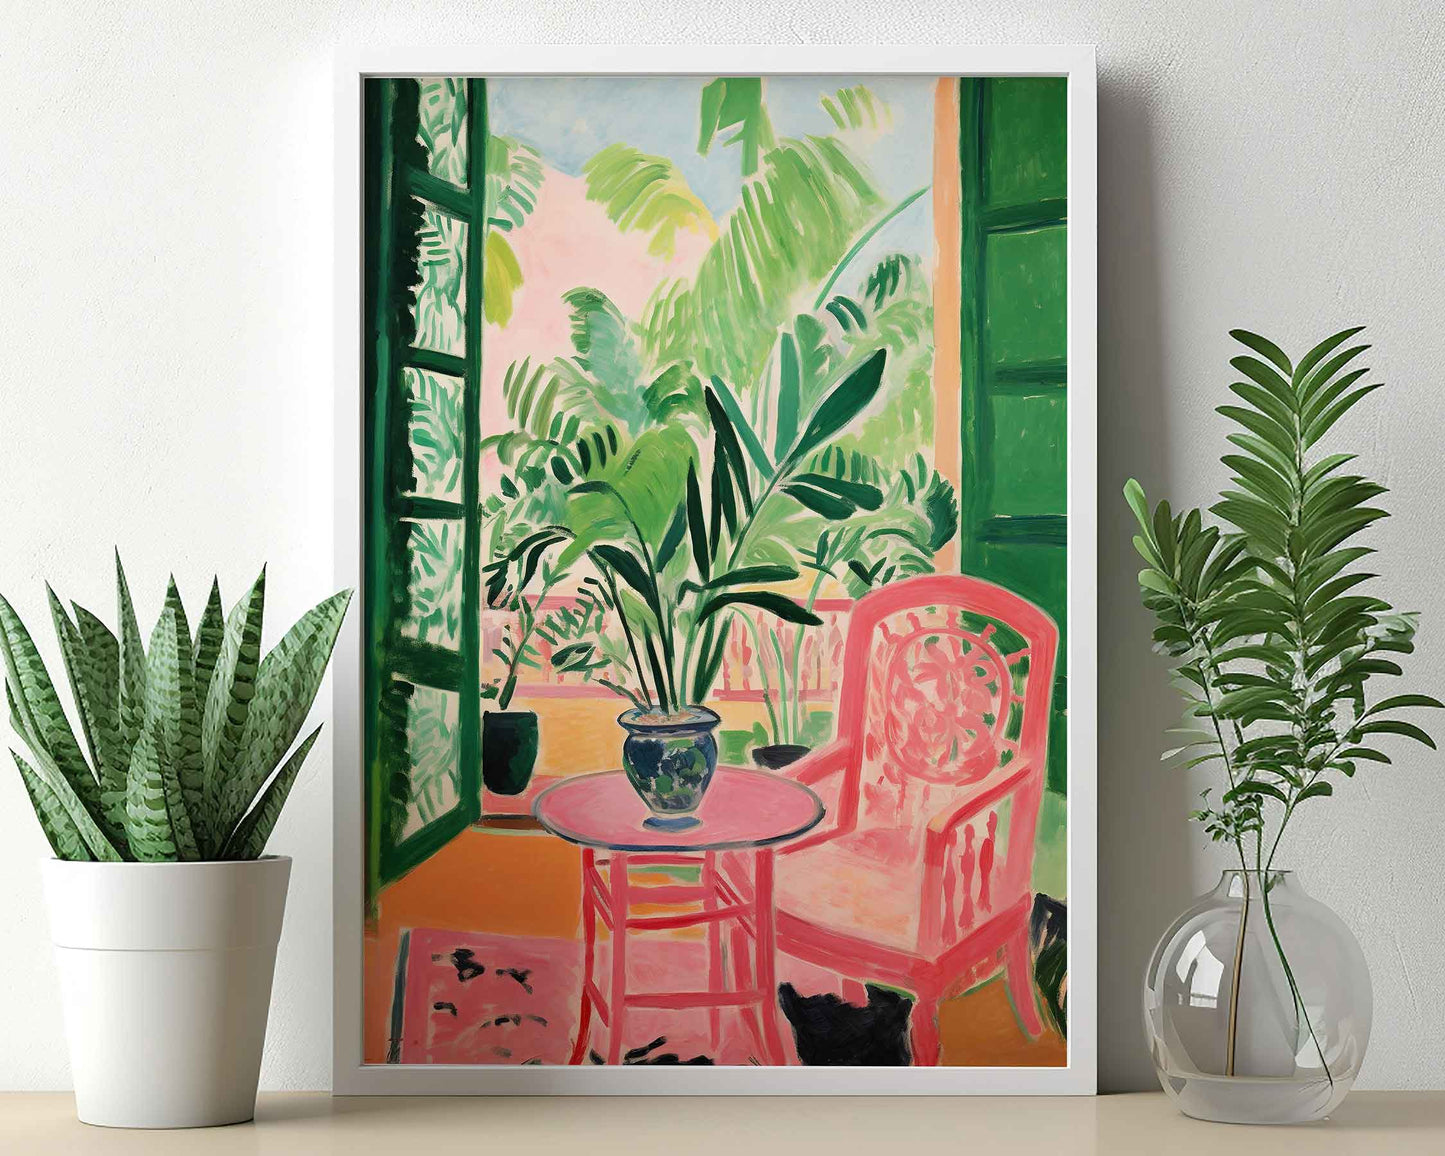 Framed Image of Matisse Art Style Wall Poster Print Green Themed Oil Paintings